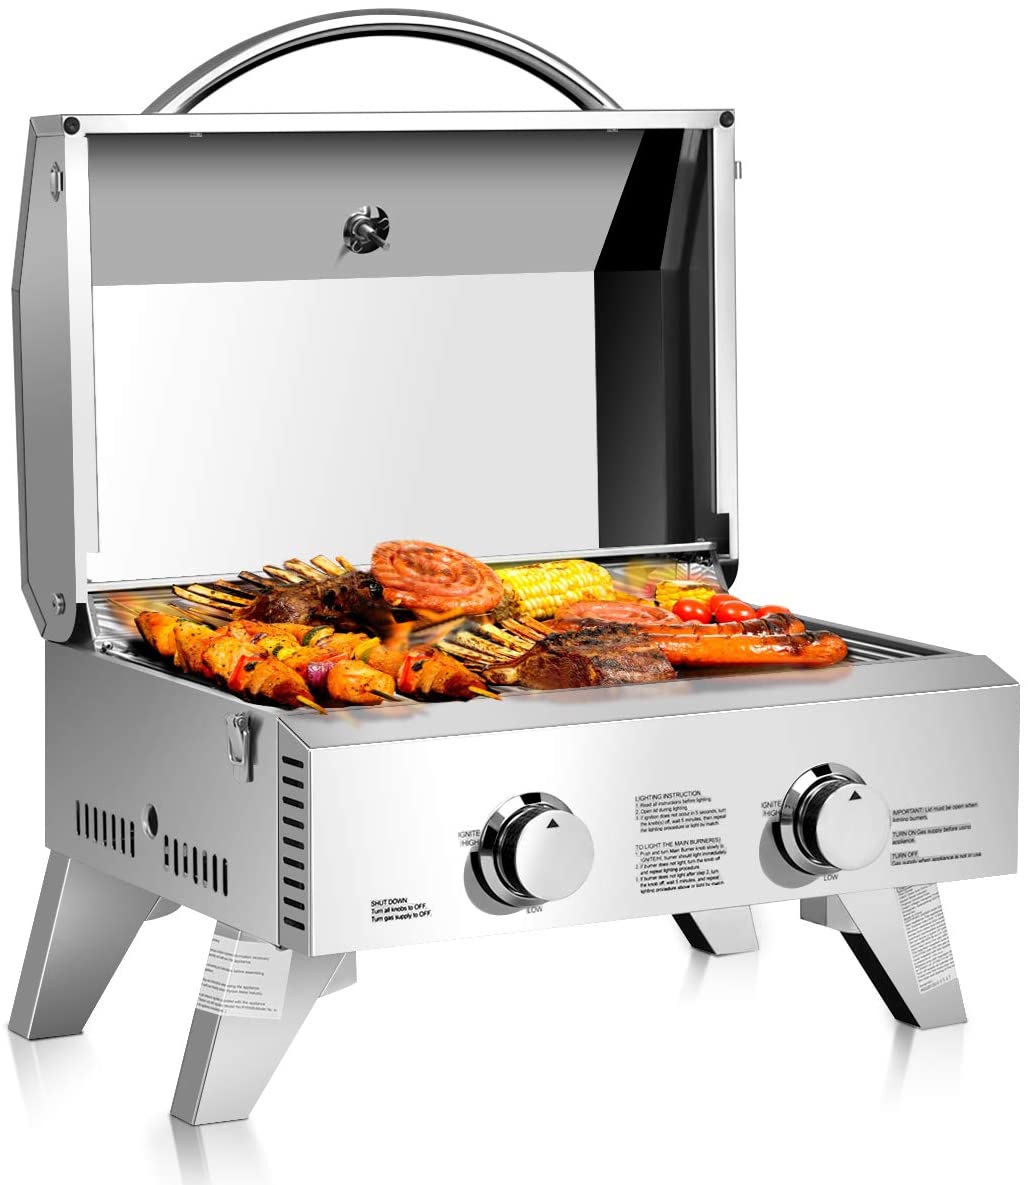 Giantex Propane TableTop Gas Grill Stainless Steel